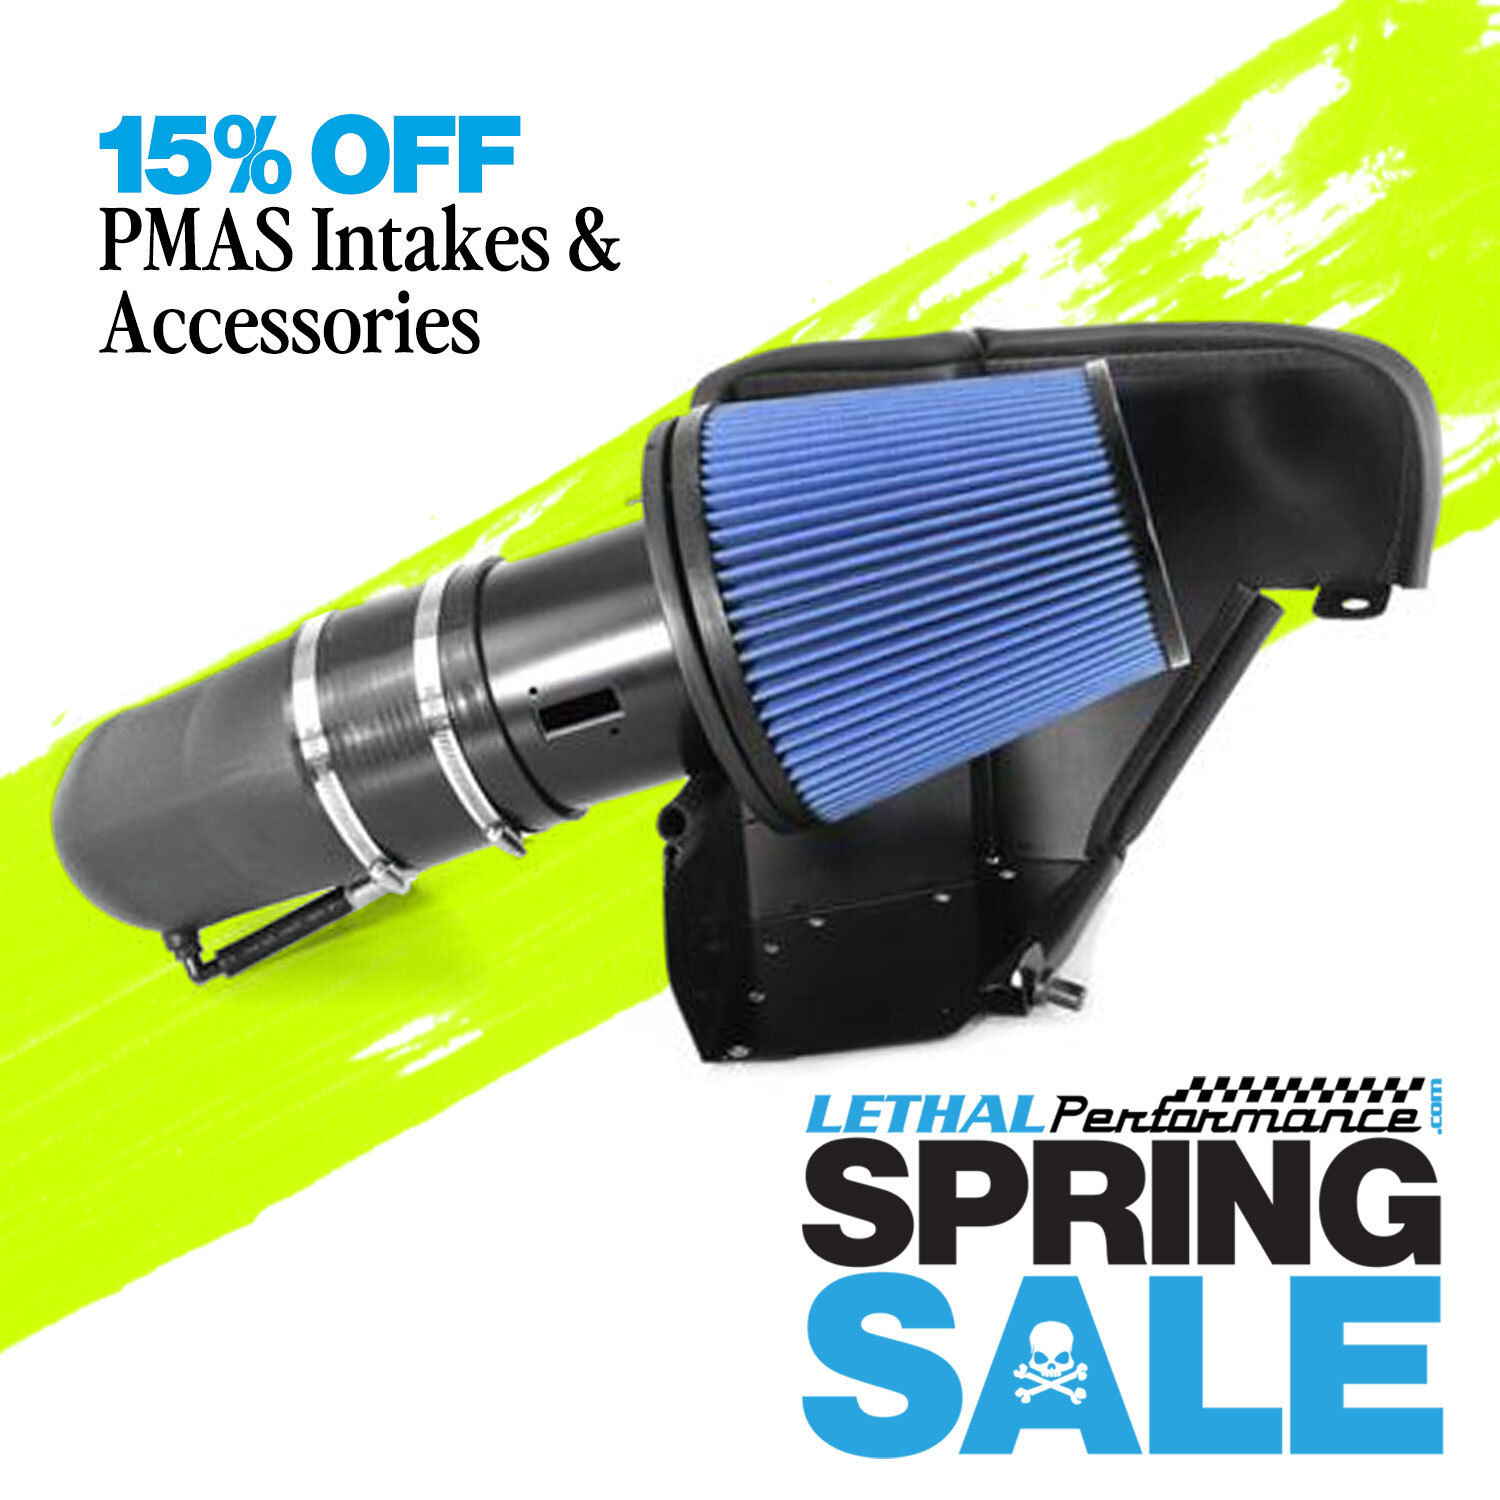 S650 Mustang Spring SALE has SPRUNG here at Lethal Performance!! springsale_pmas